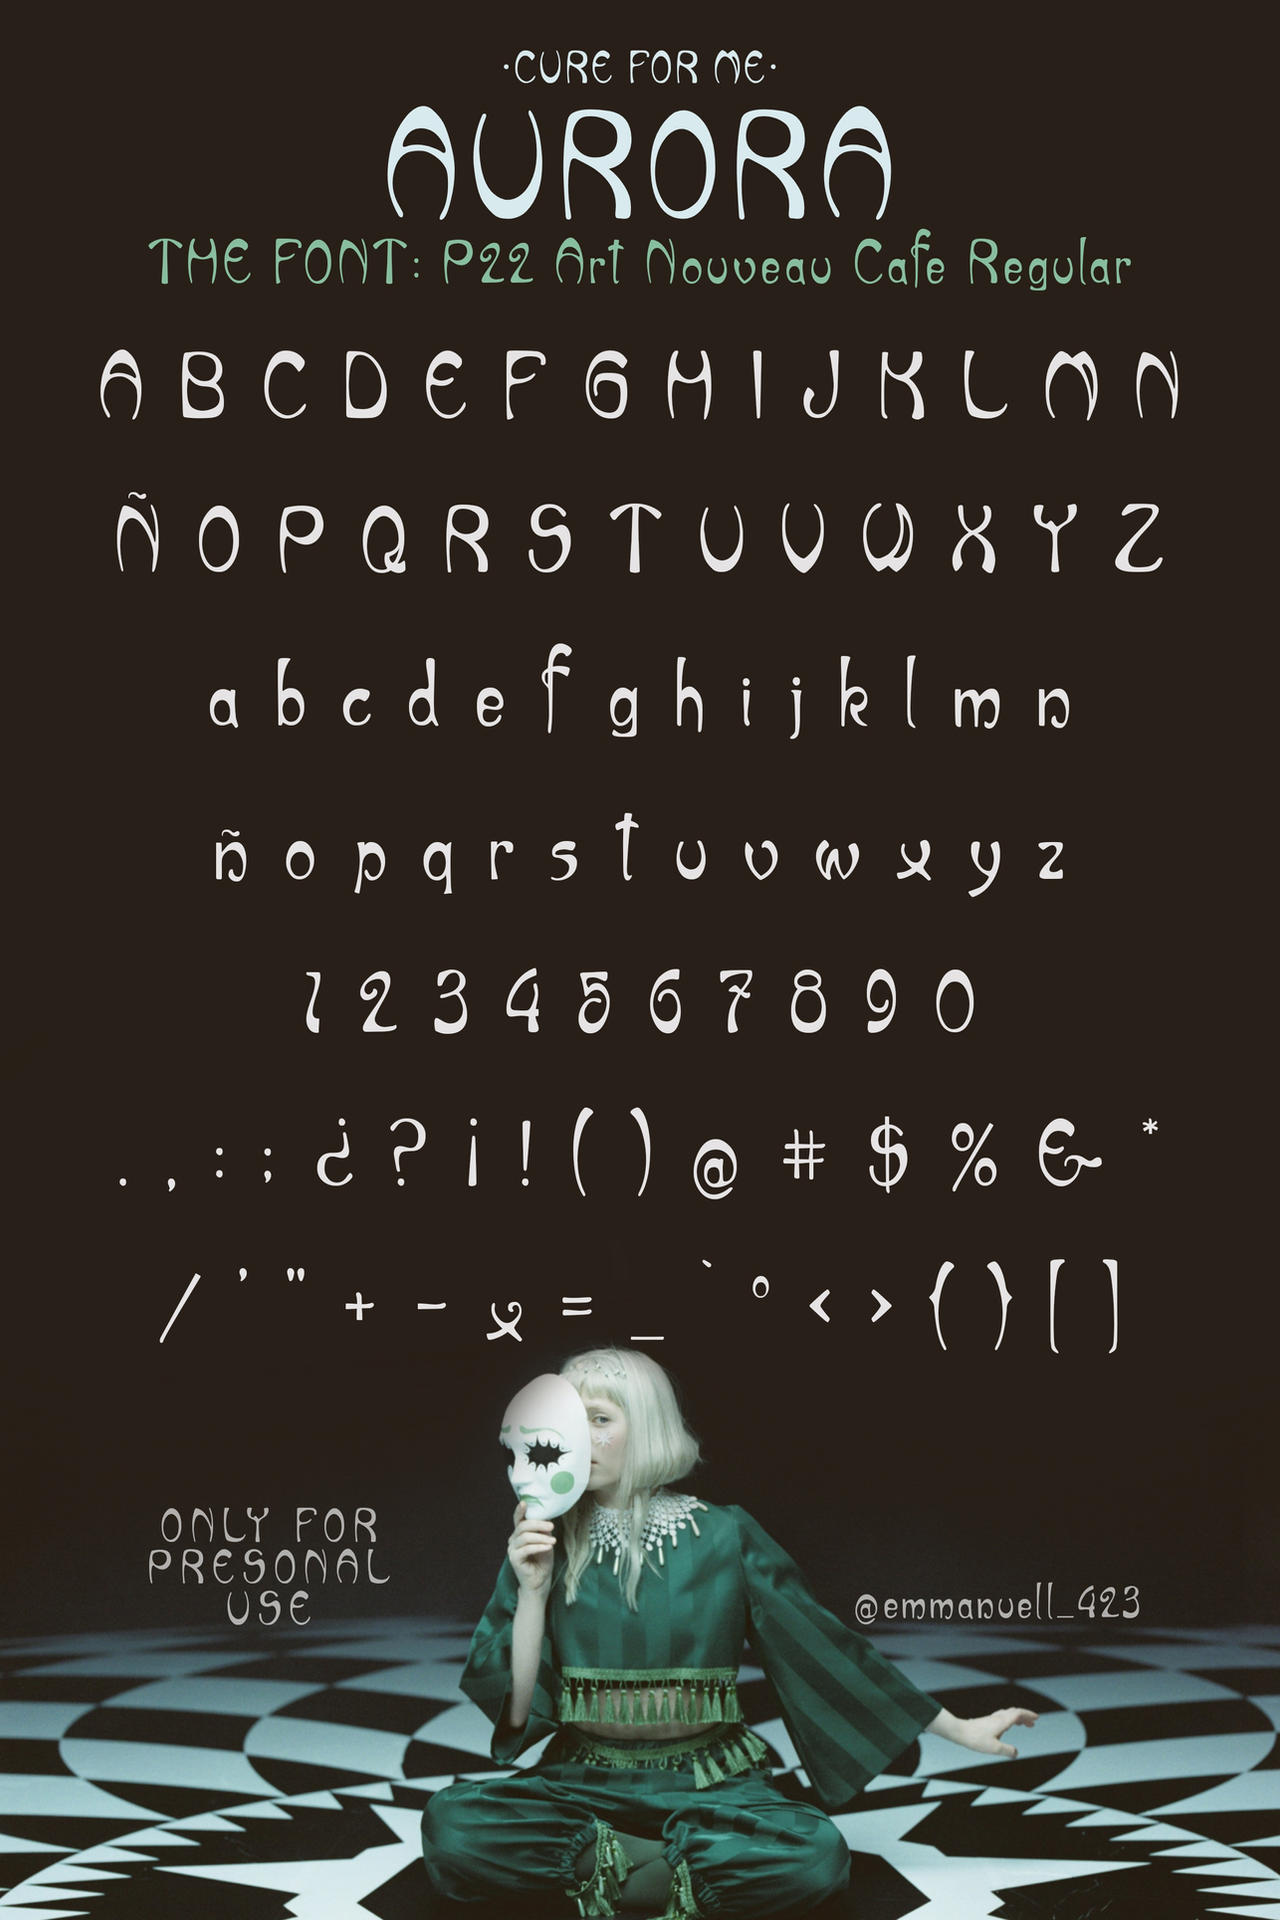 CURE FOR ME - AURORA (The font) @emmanuell 423 by manu423 on